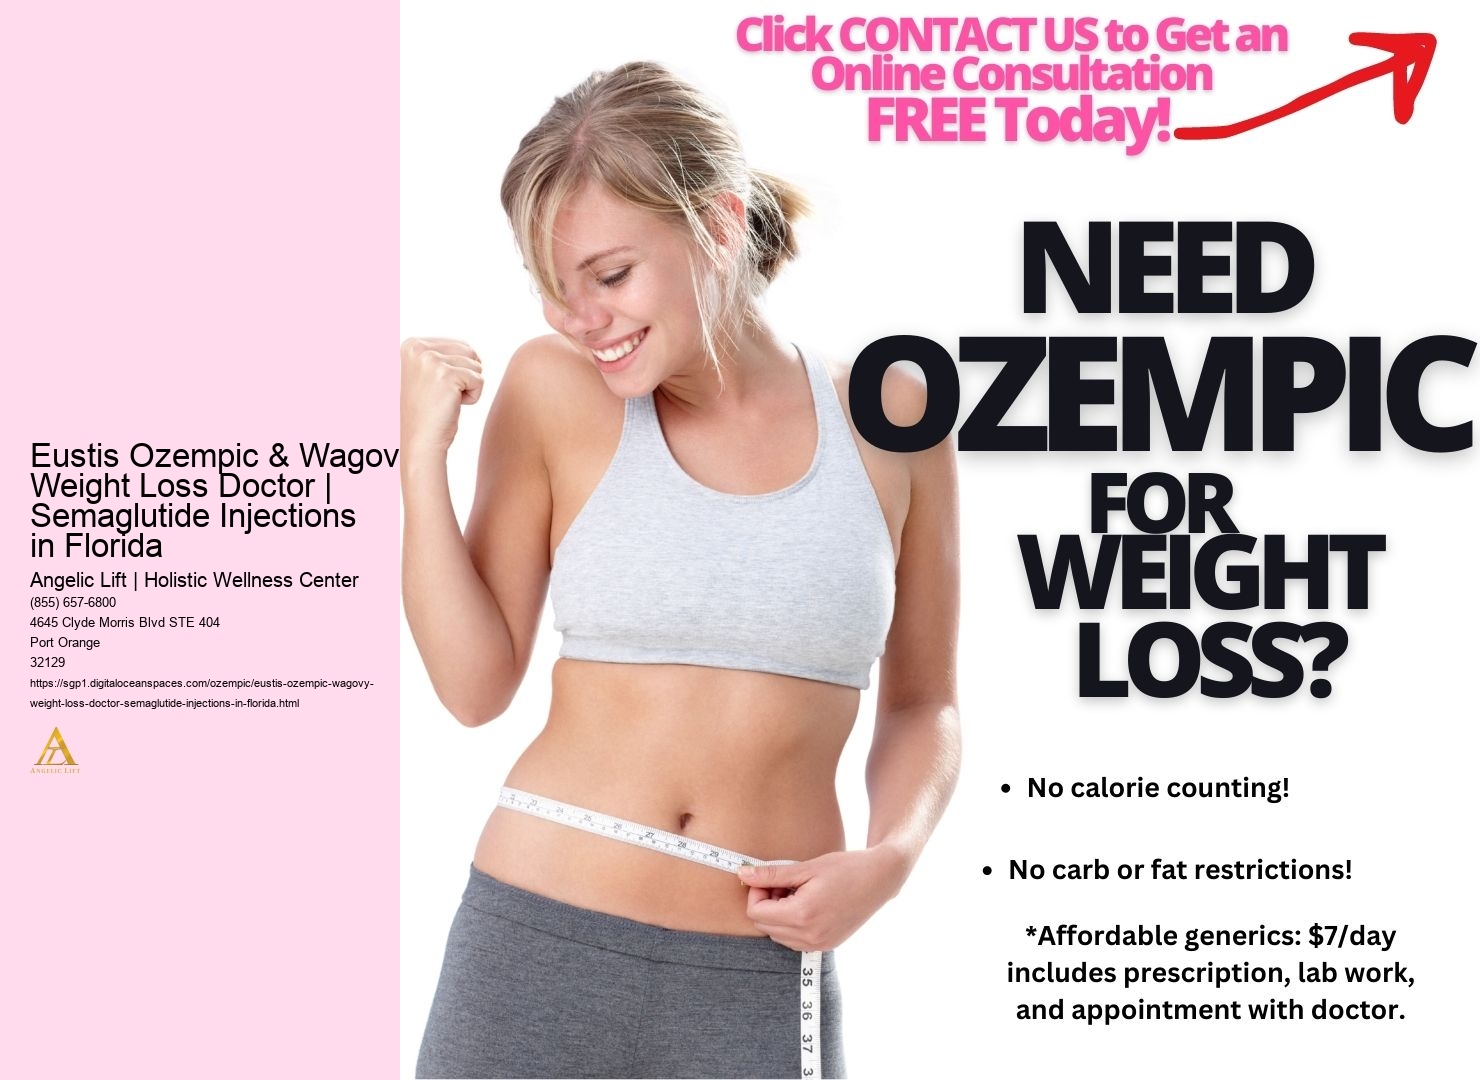 Eustis Ozempic & Wagovy Weight Loss Doctor | Semaglutide Injections in Florida